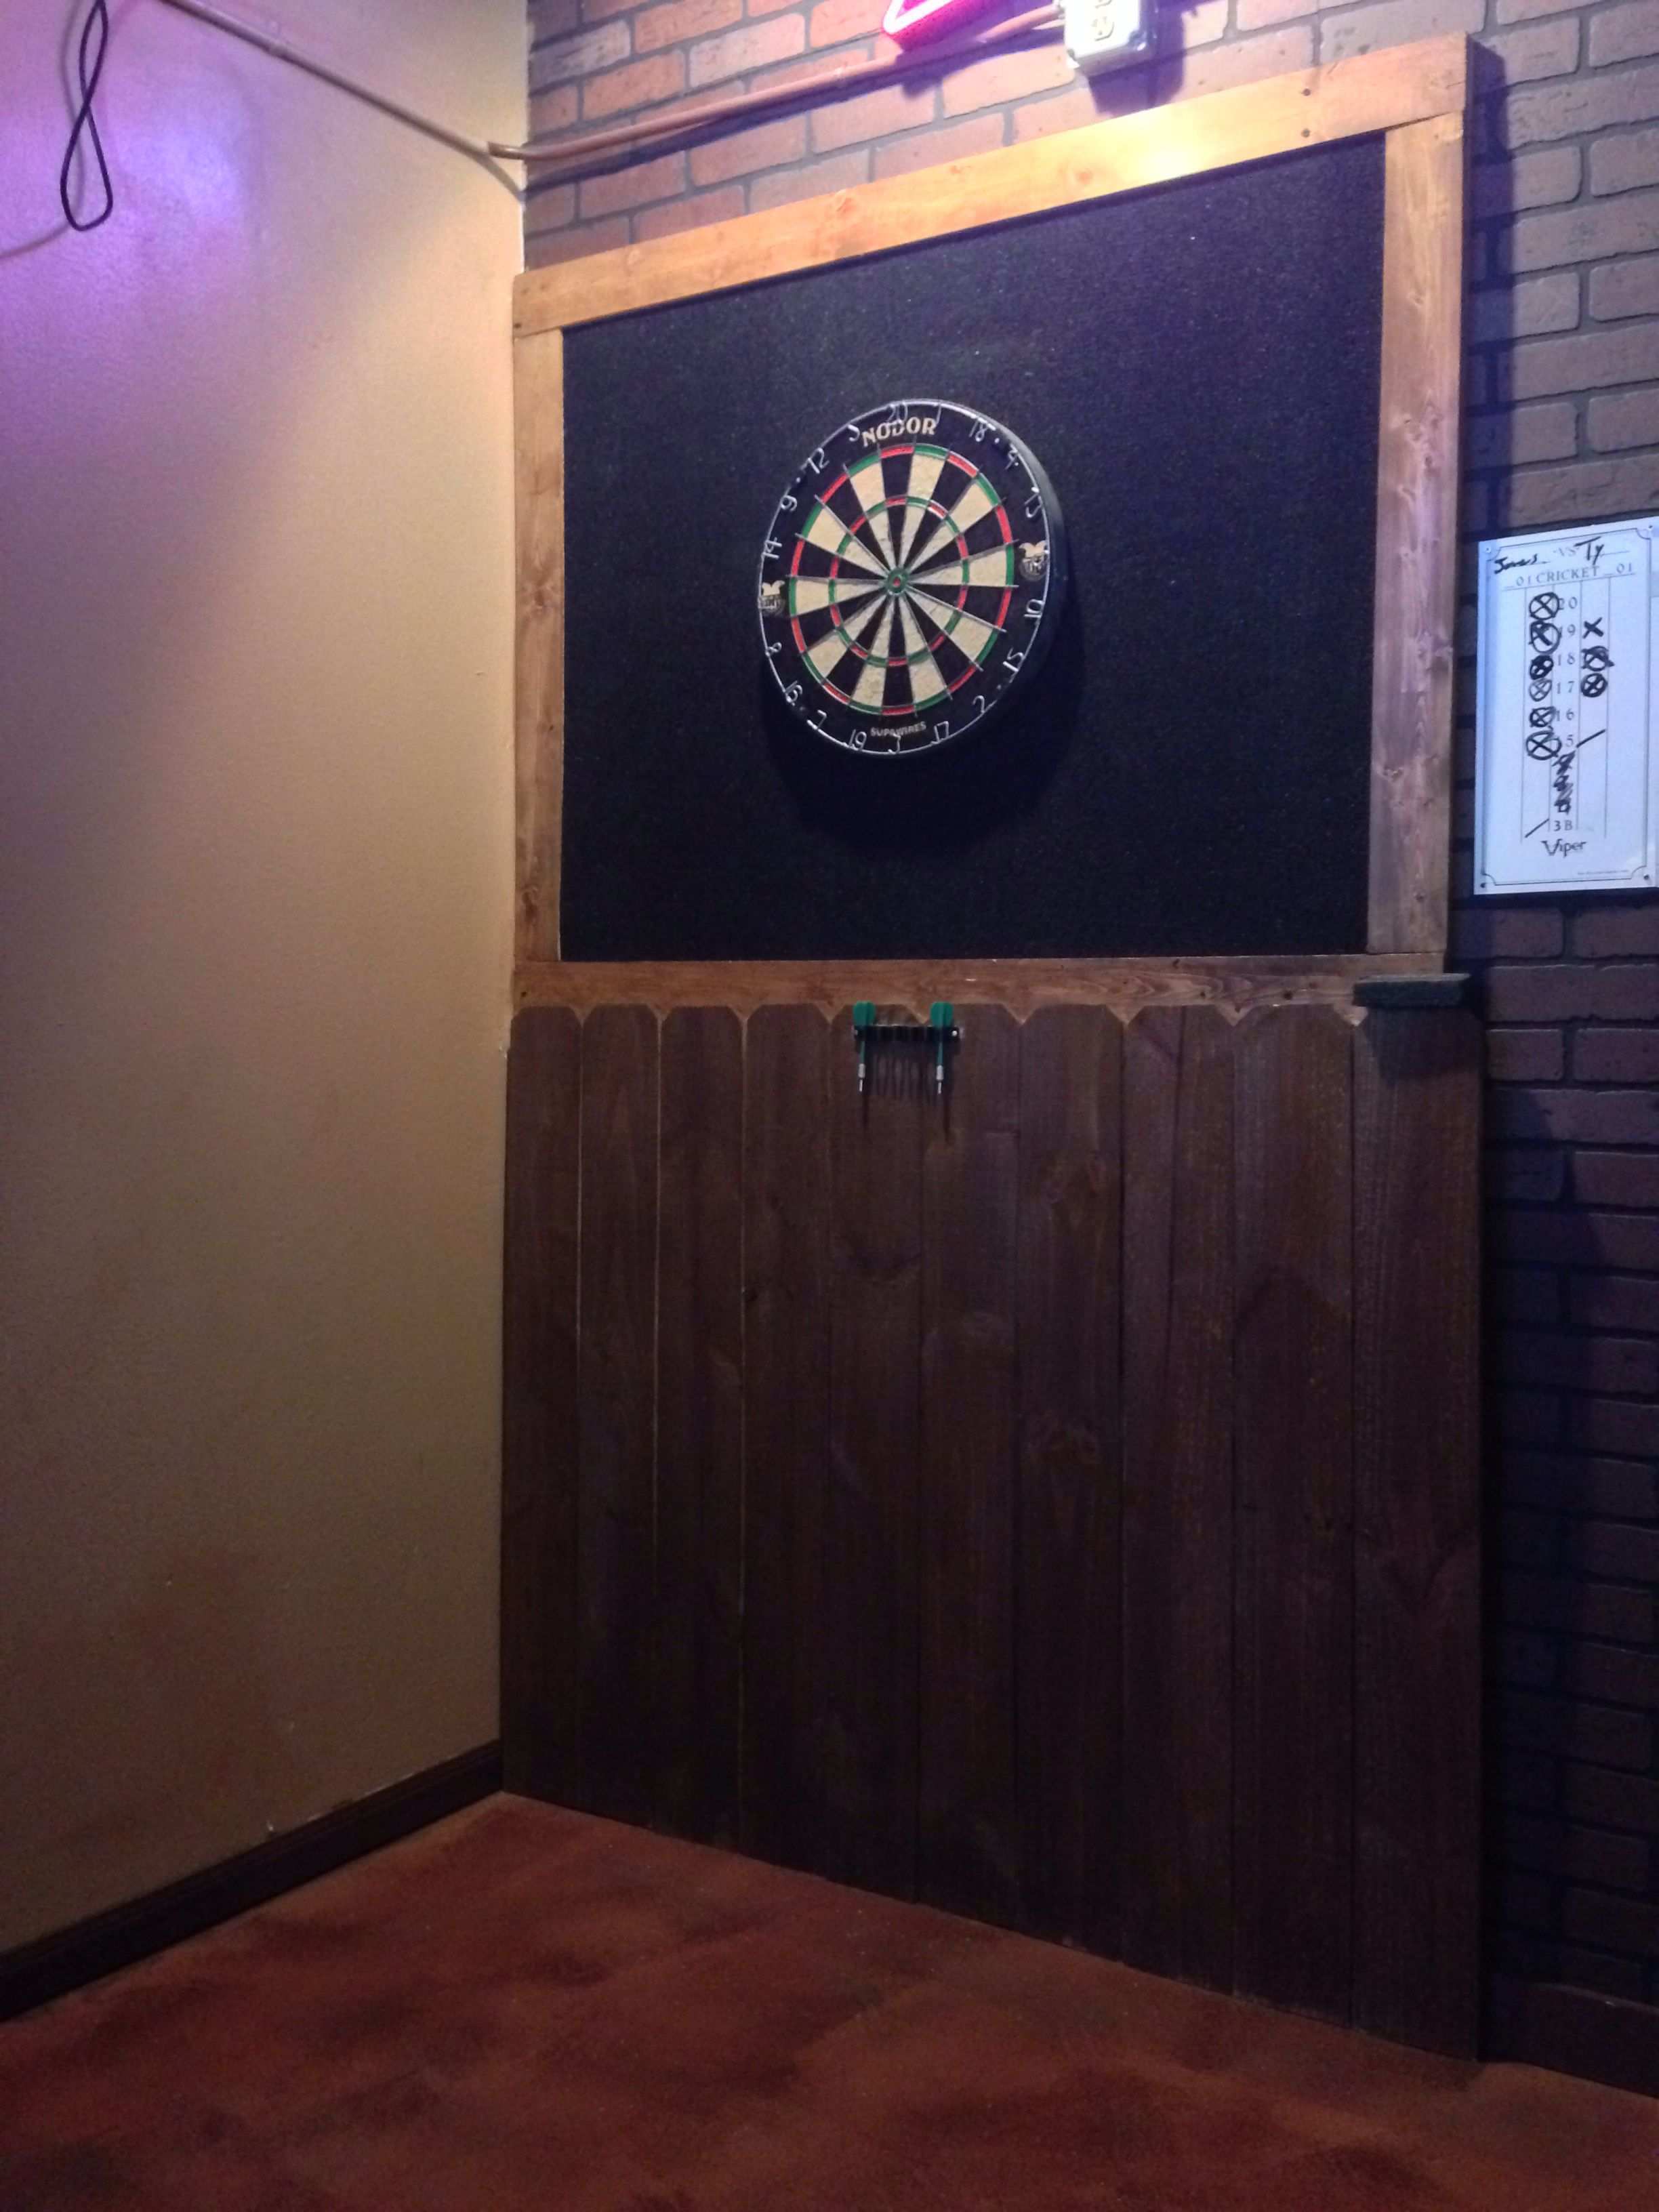 Cover An Area With Cork Paint The Cork Dart Board Dartboard Cabinet Diy Board Game Room